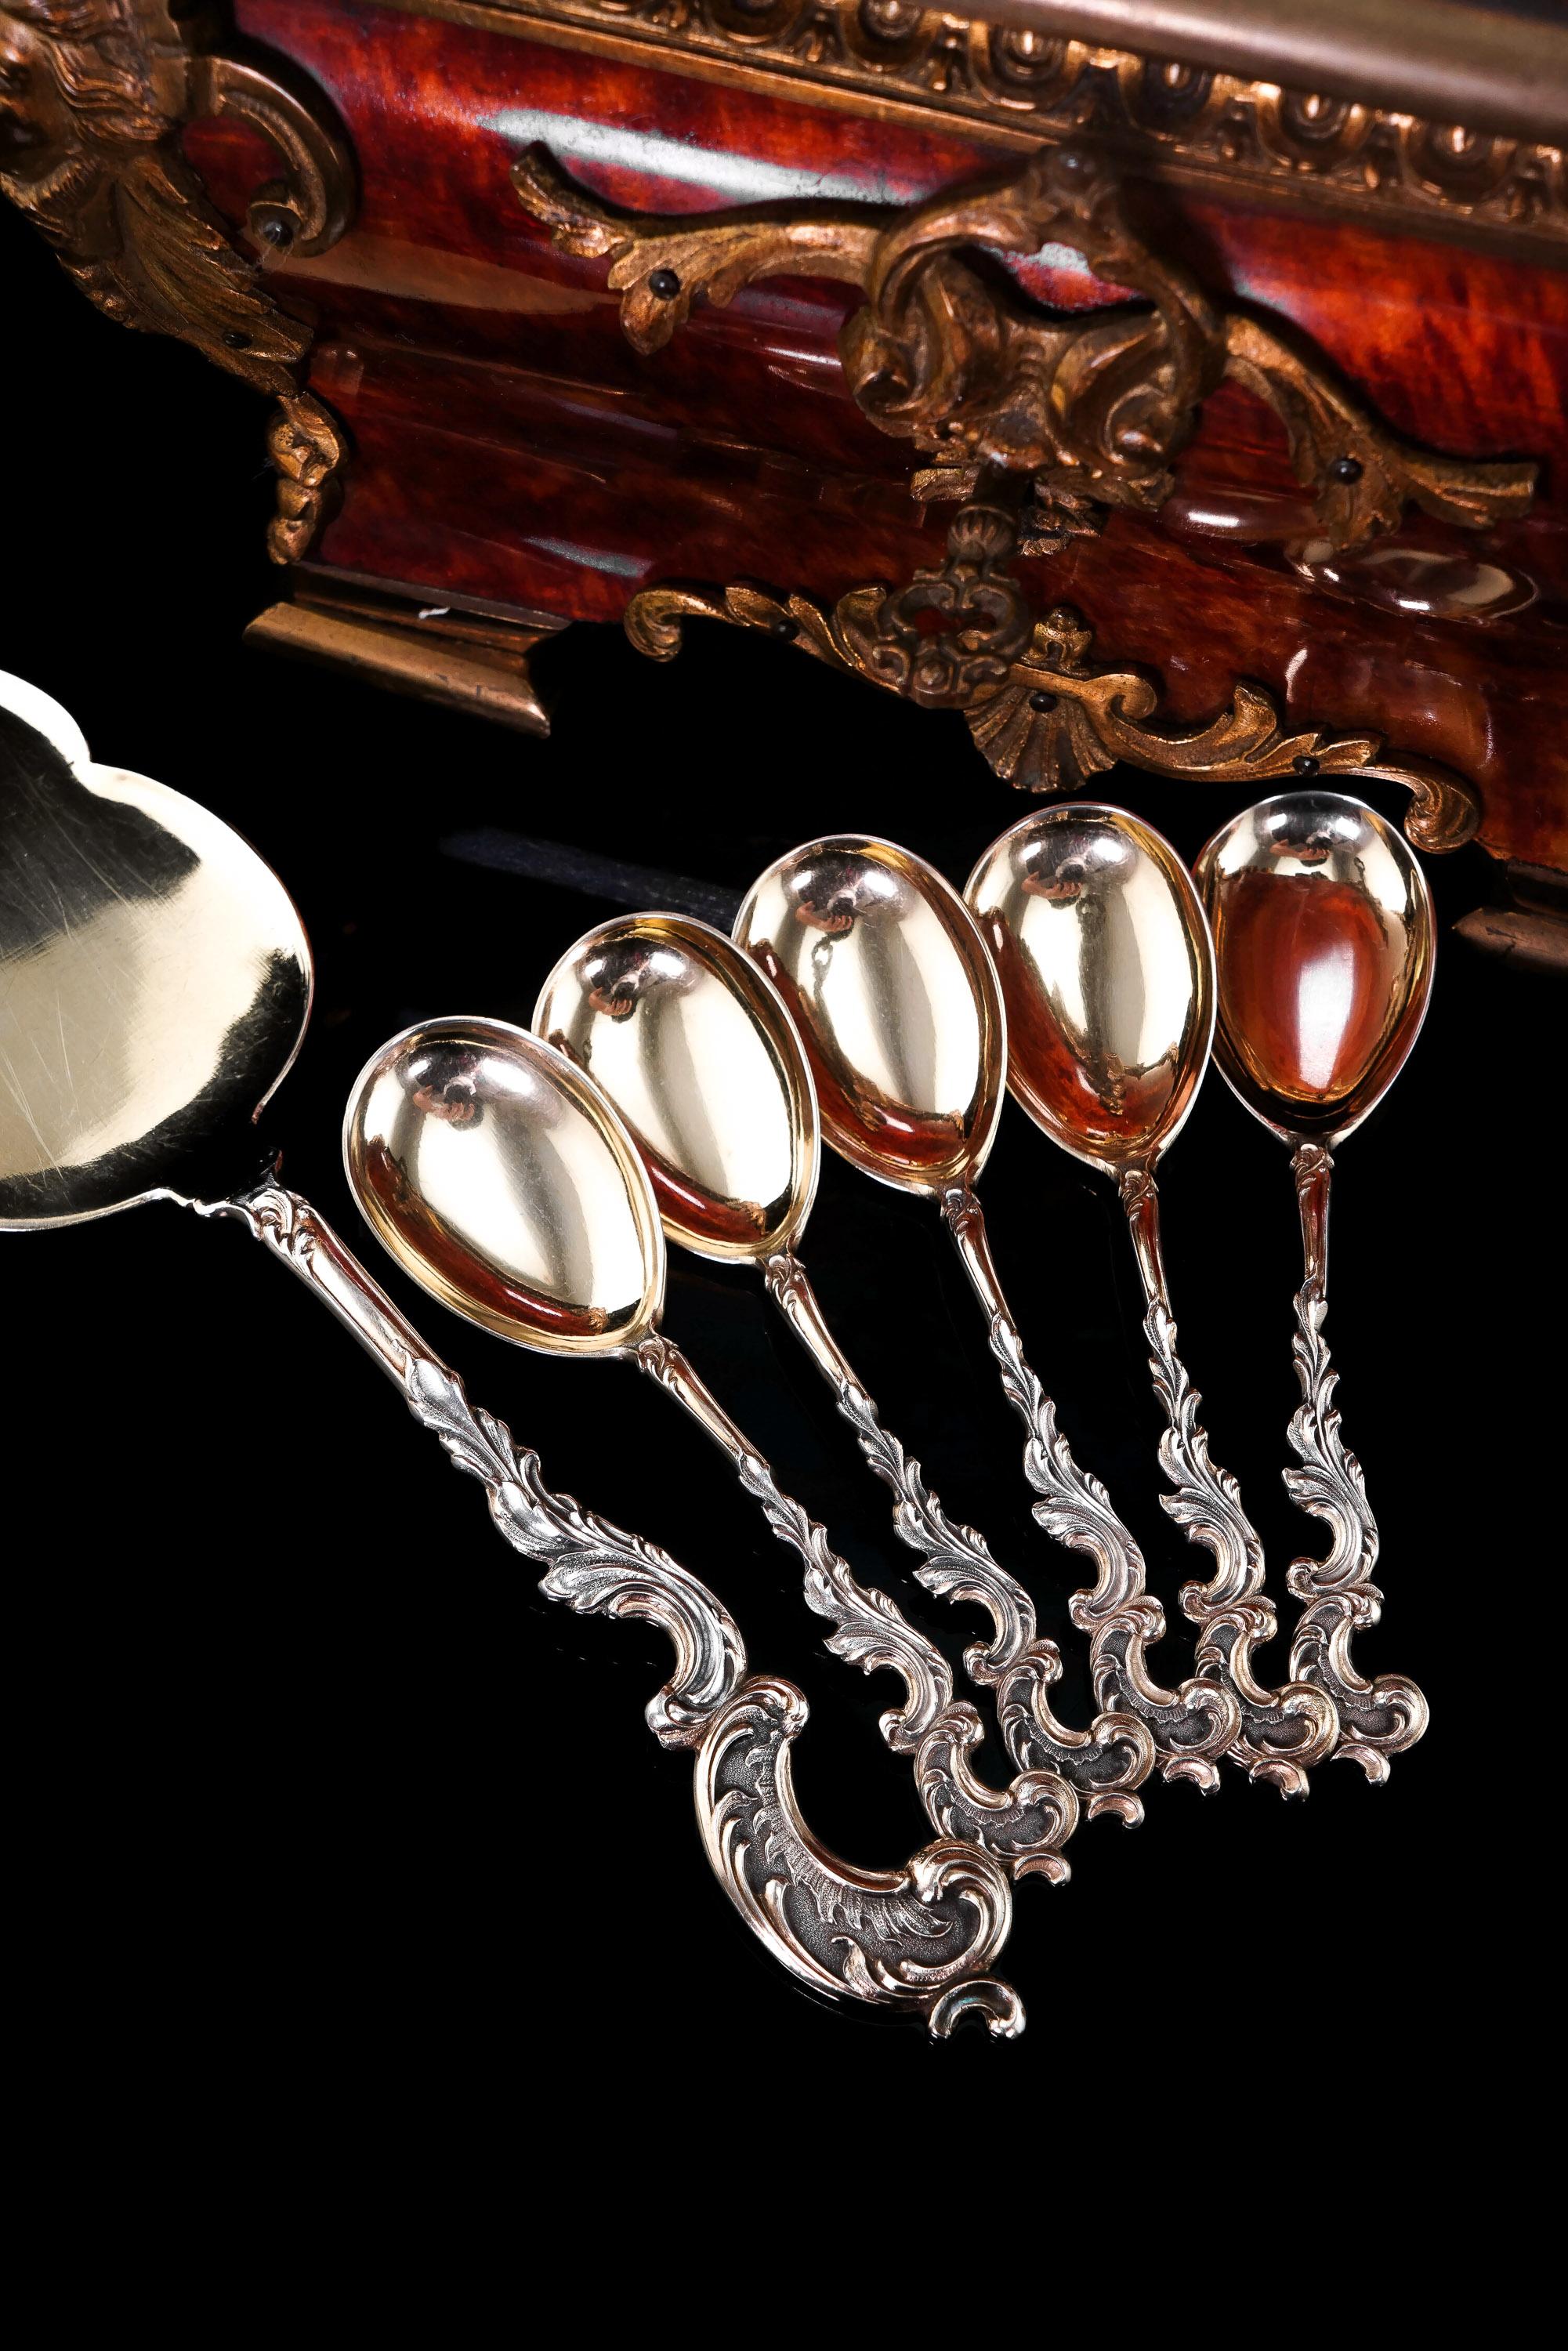 Antique German Solid Silver Icecream Server & Spoons in Rococo Style - c.1900 For Sale 10